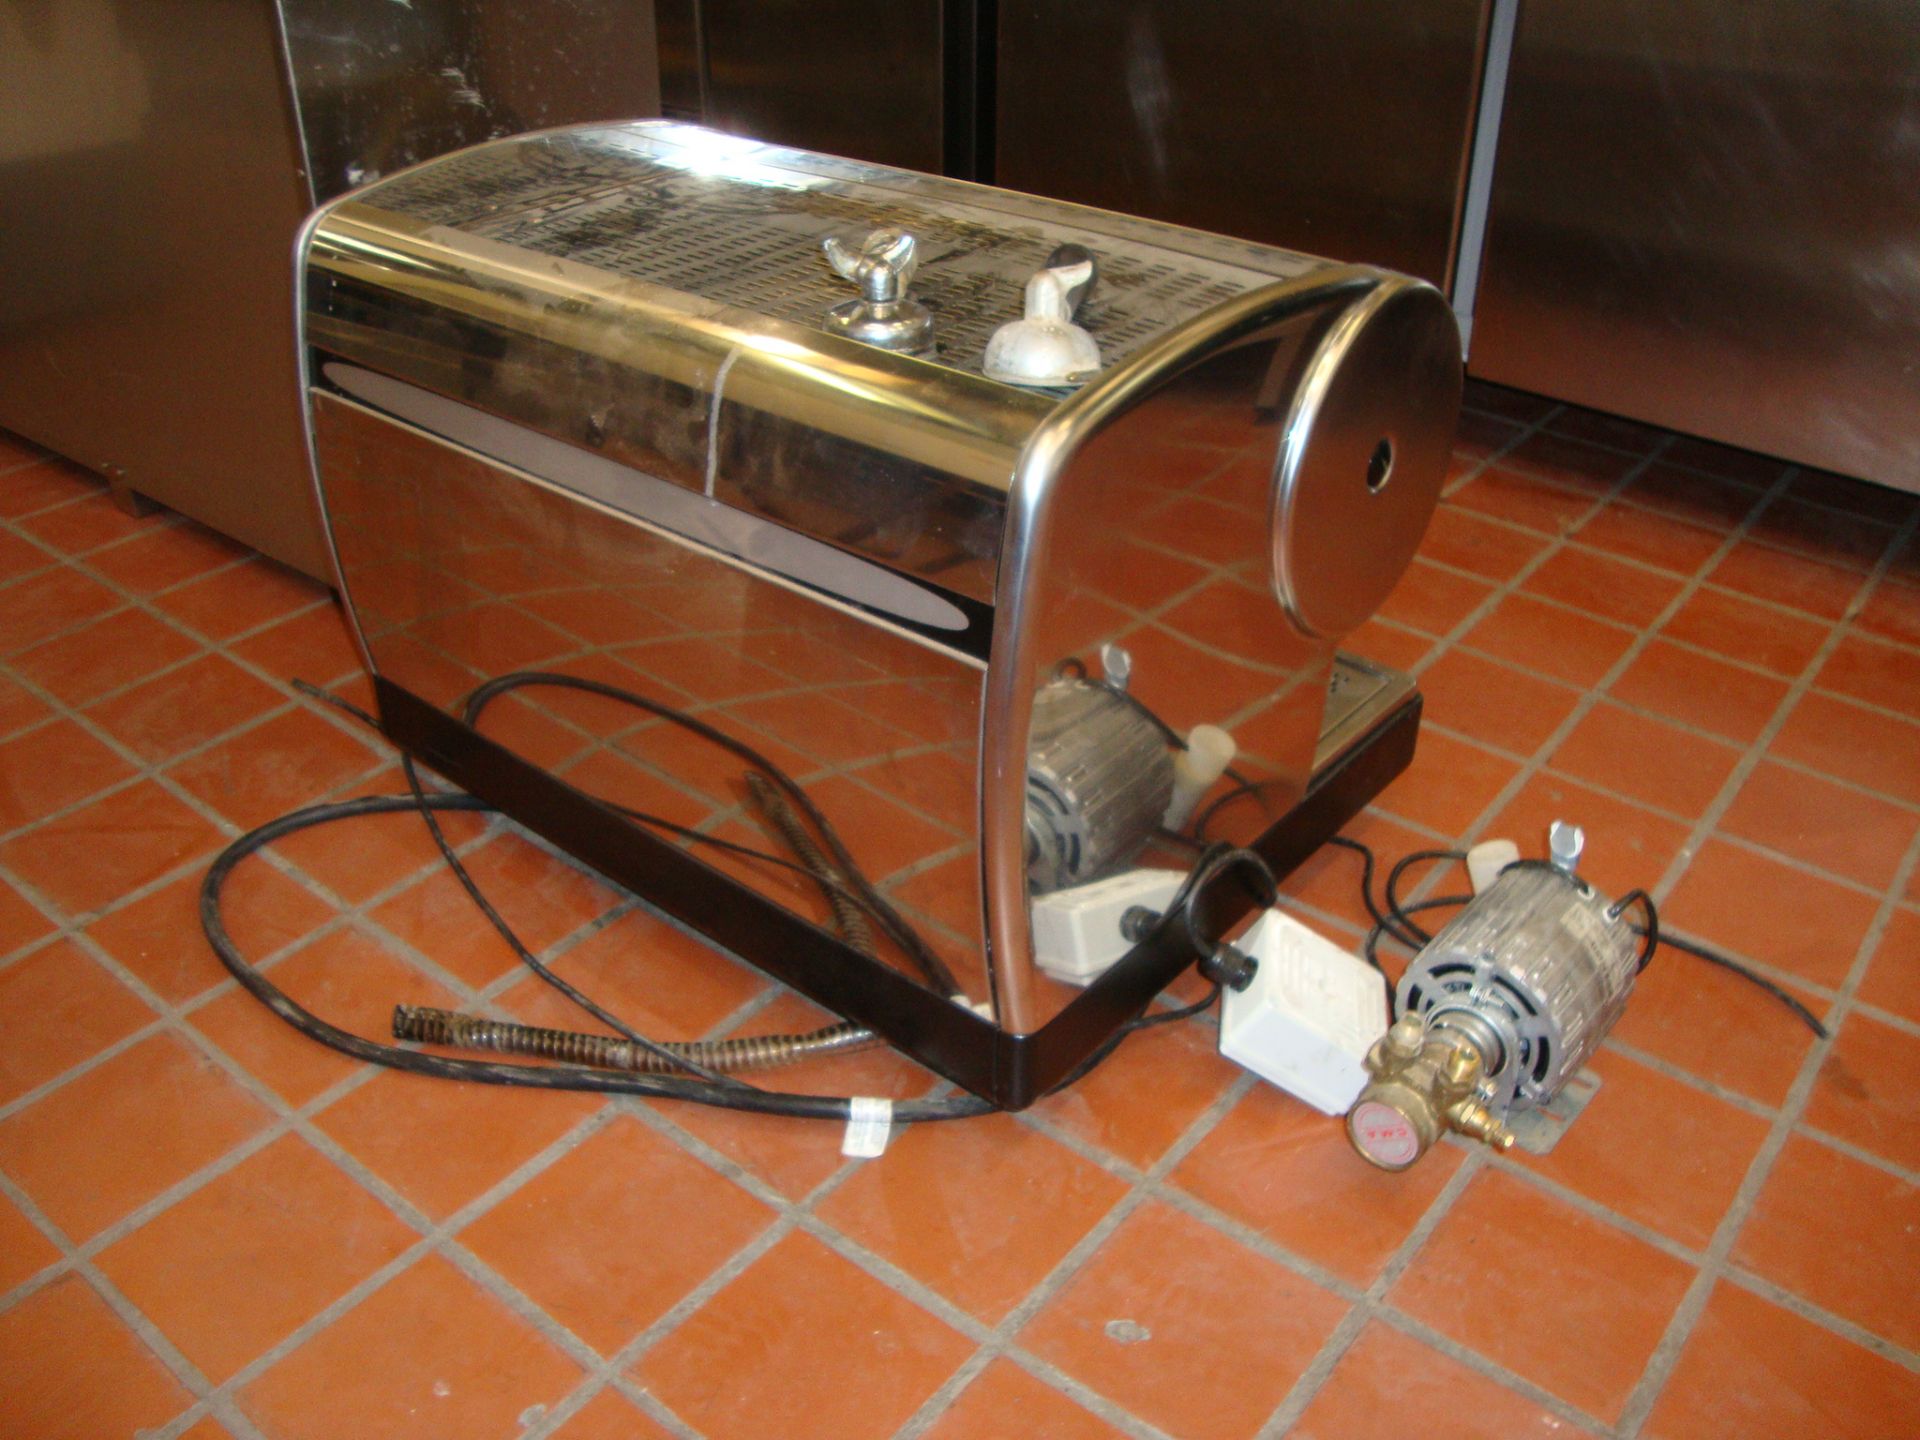 Marisa stainless steel twin head commercial coffee machine including pump pictured to side of - Image 7 of 8